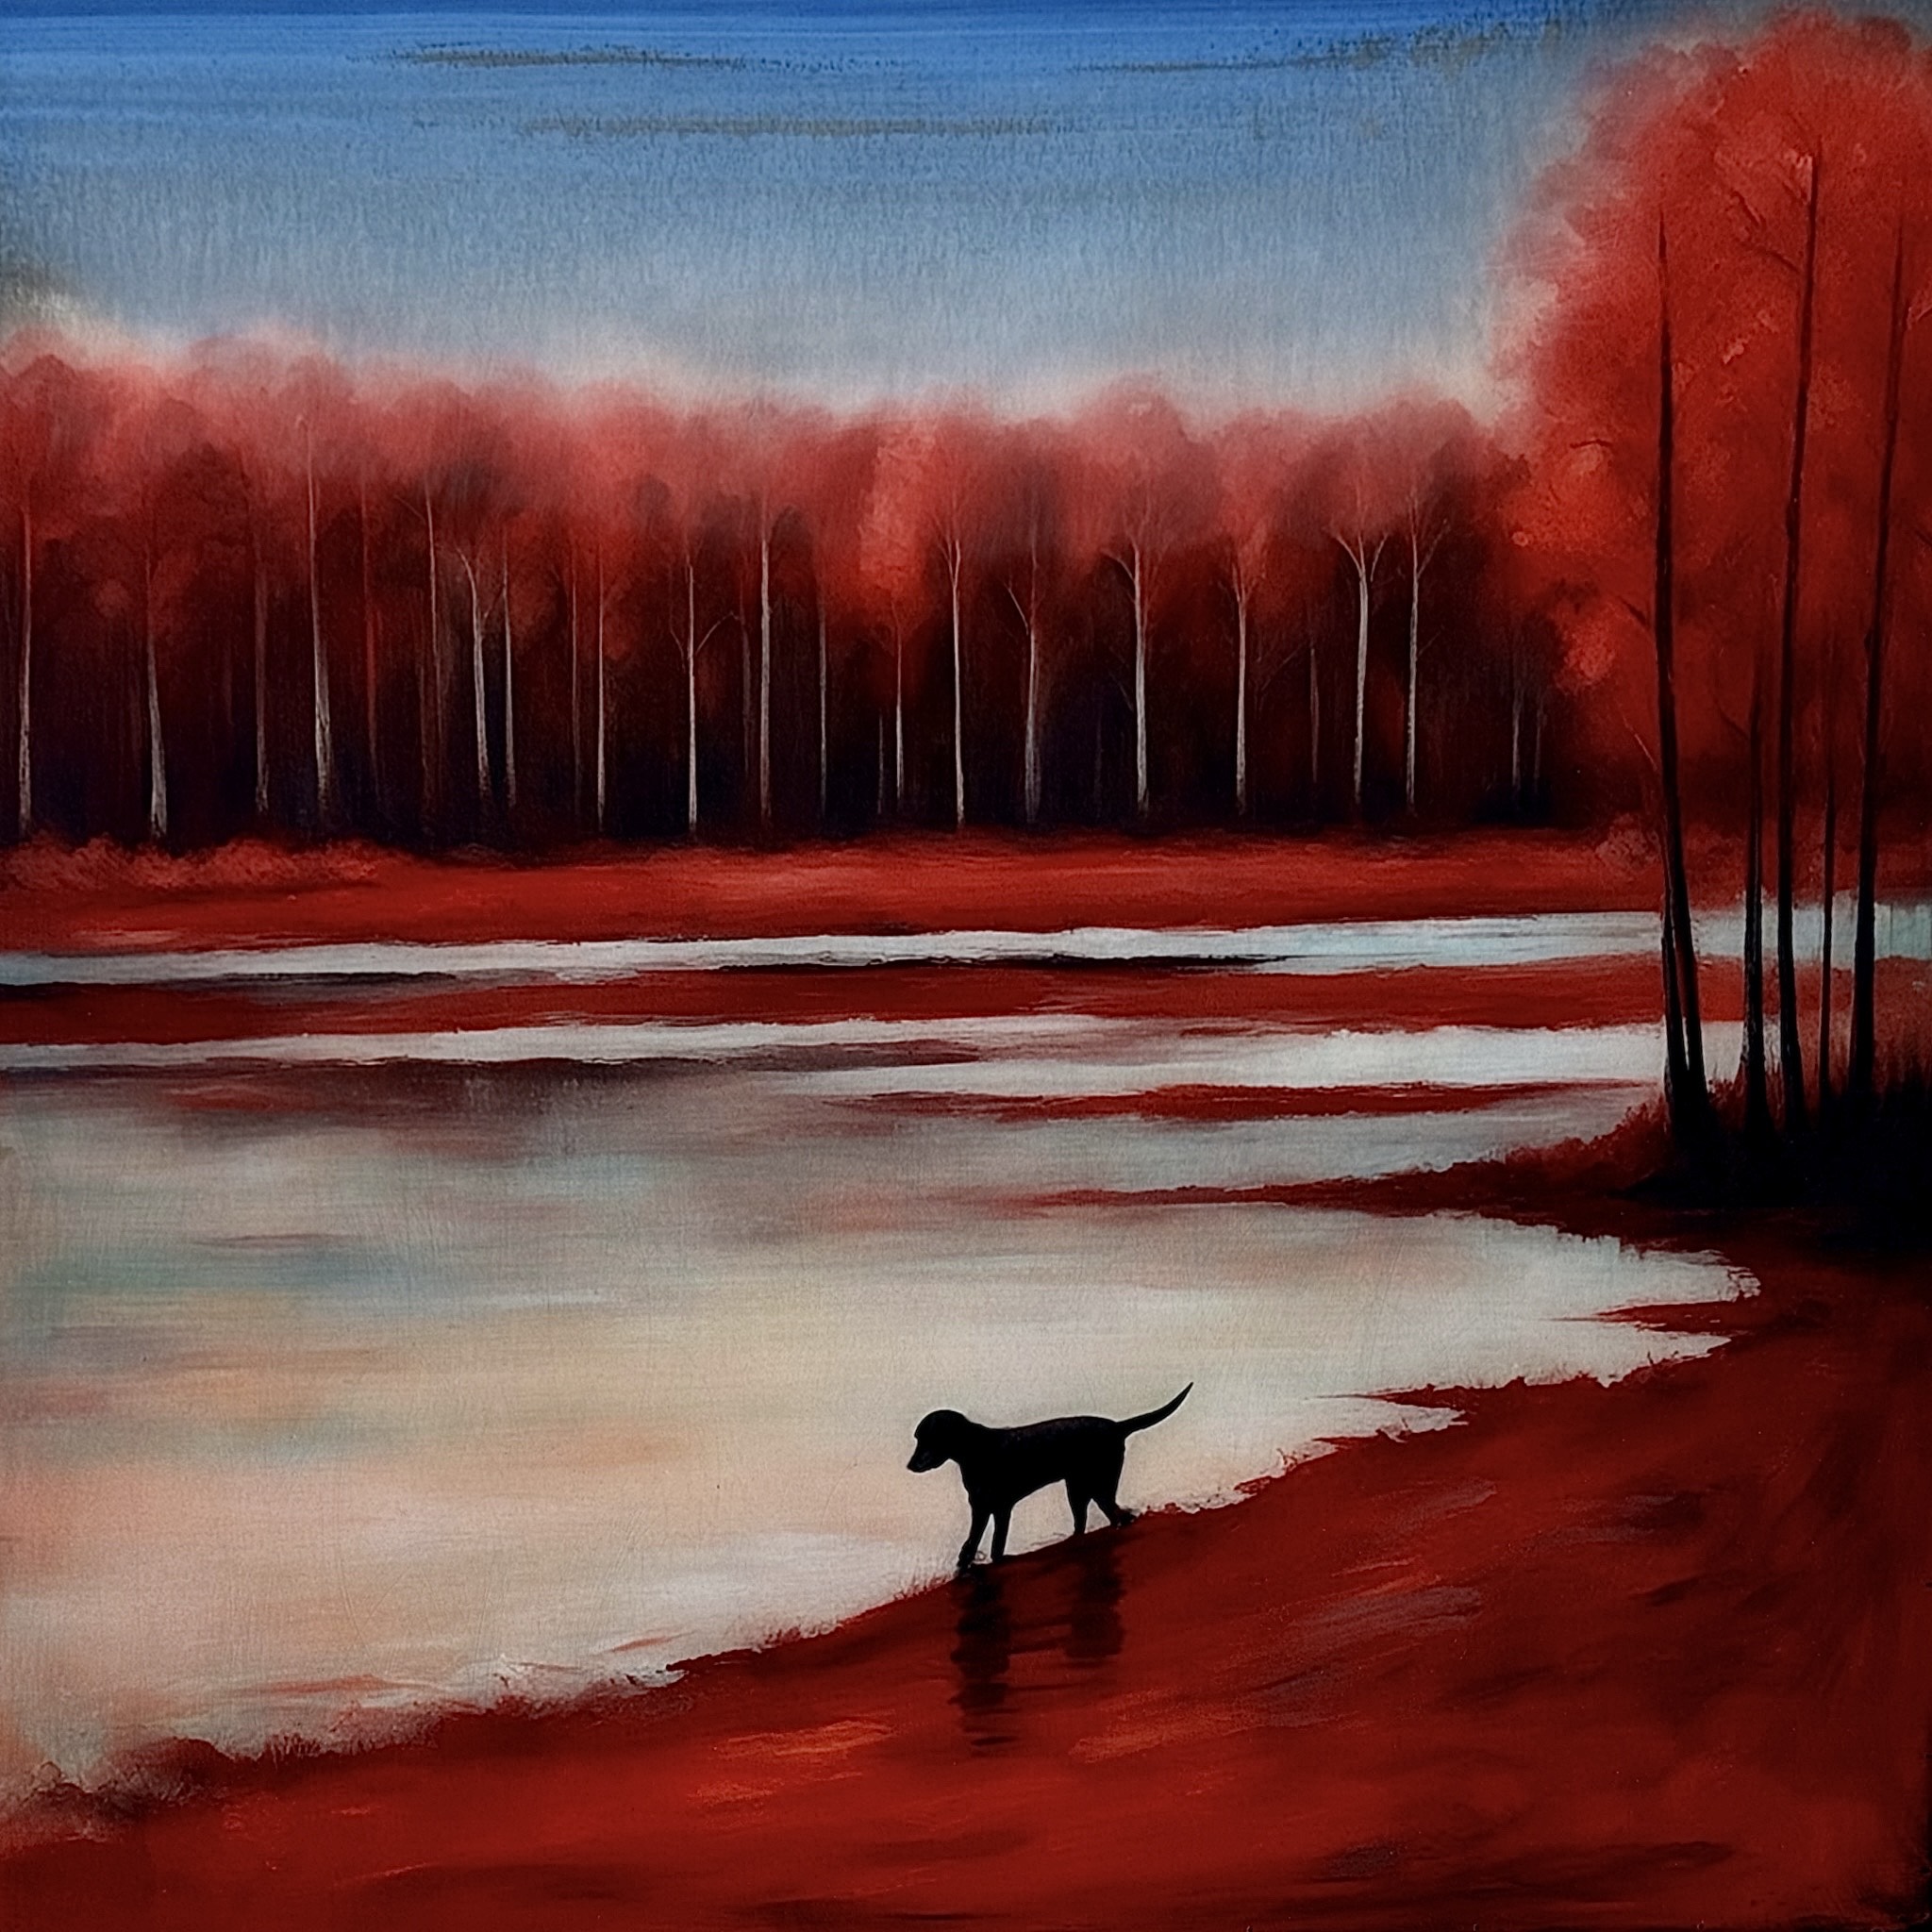 LAKESIDE WONDERING, mixed media on panel, 30 x 30 inches